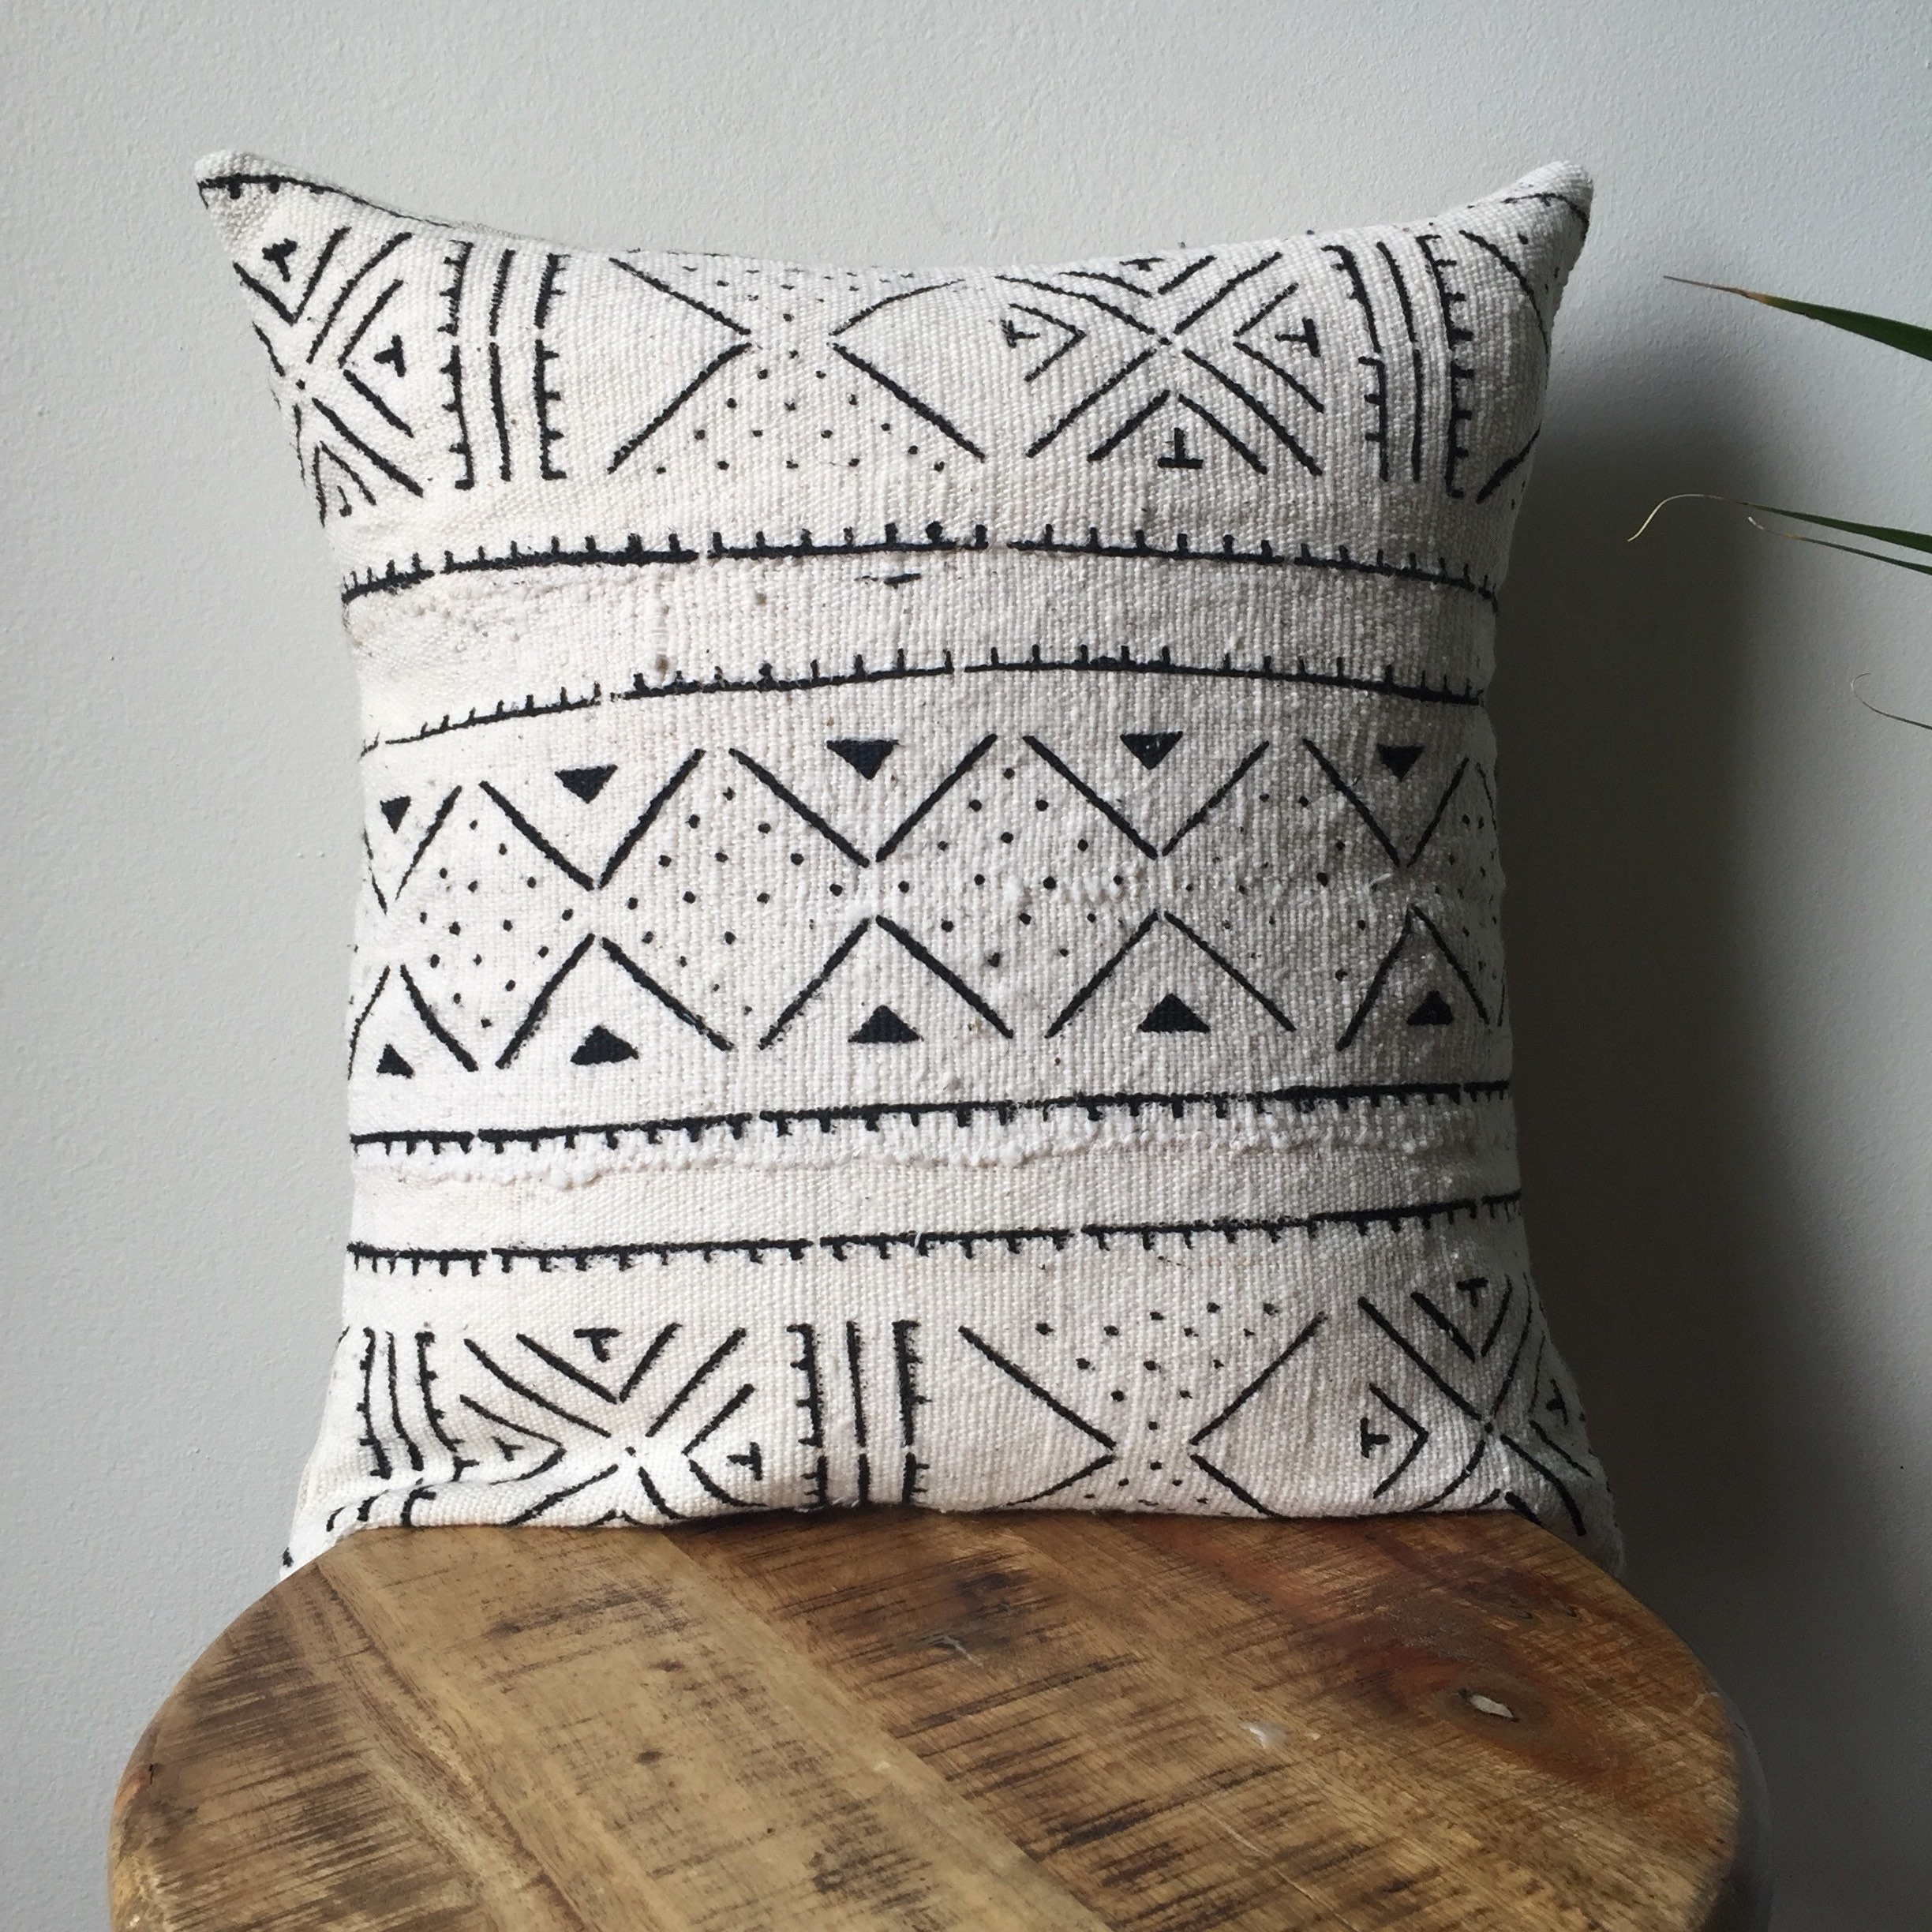 DOUBLE SIDED African Mudcloth White & Black Tribal Down - Etsy